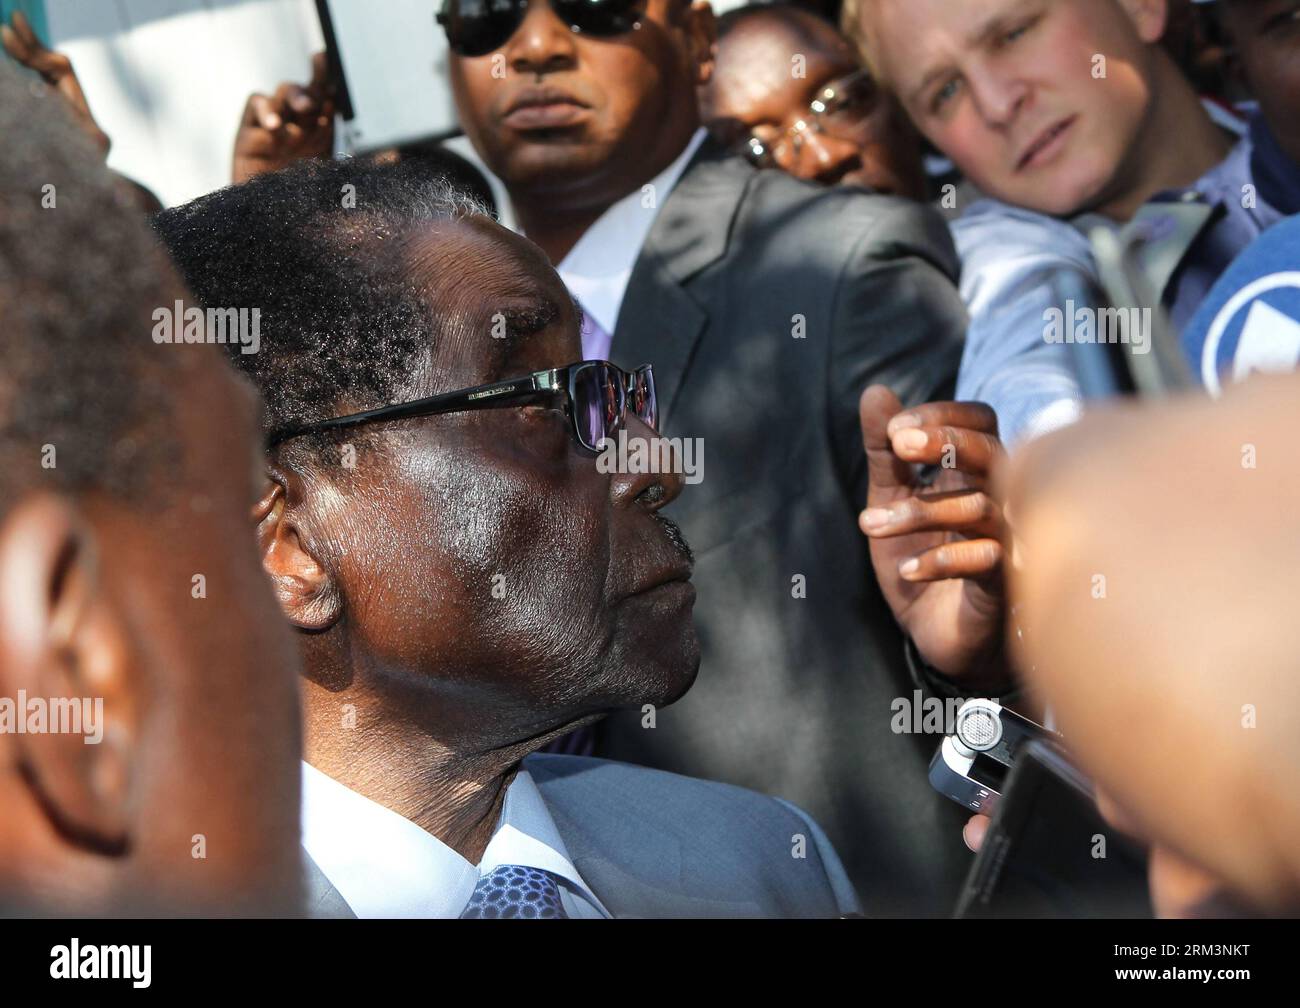 Bildnummer: 60263707  Datum: 31.07.2013  Copyright: imago/Xinhua HARARE, July 31, 2013 (Xinhua) -- Zimbabwe s incumbent President and presidential candidate of Zimbabwe African National Union-Patriotic Front (Zanu-PF) Robert Mugabe receives an interview after casting his ballot at a polling station in Harare, capital of Zimbabwe, July 31, 2013. Robert Mugabe, Africa s oldest leader at 89, said Wednesday that he will serve a full five-year term if re-elected into the office. A total of 6.4 million registered voters in Zimbabwe lined up to cast their ballots at 9,735 polling stations on Wednesda Stock Photo